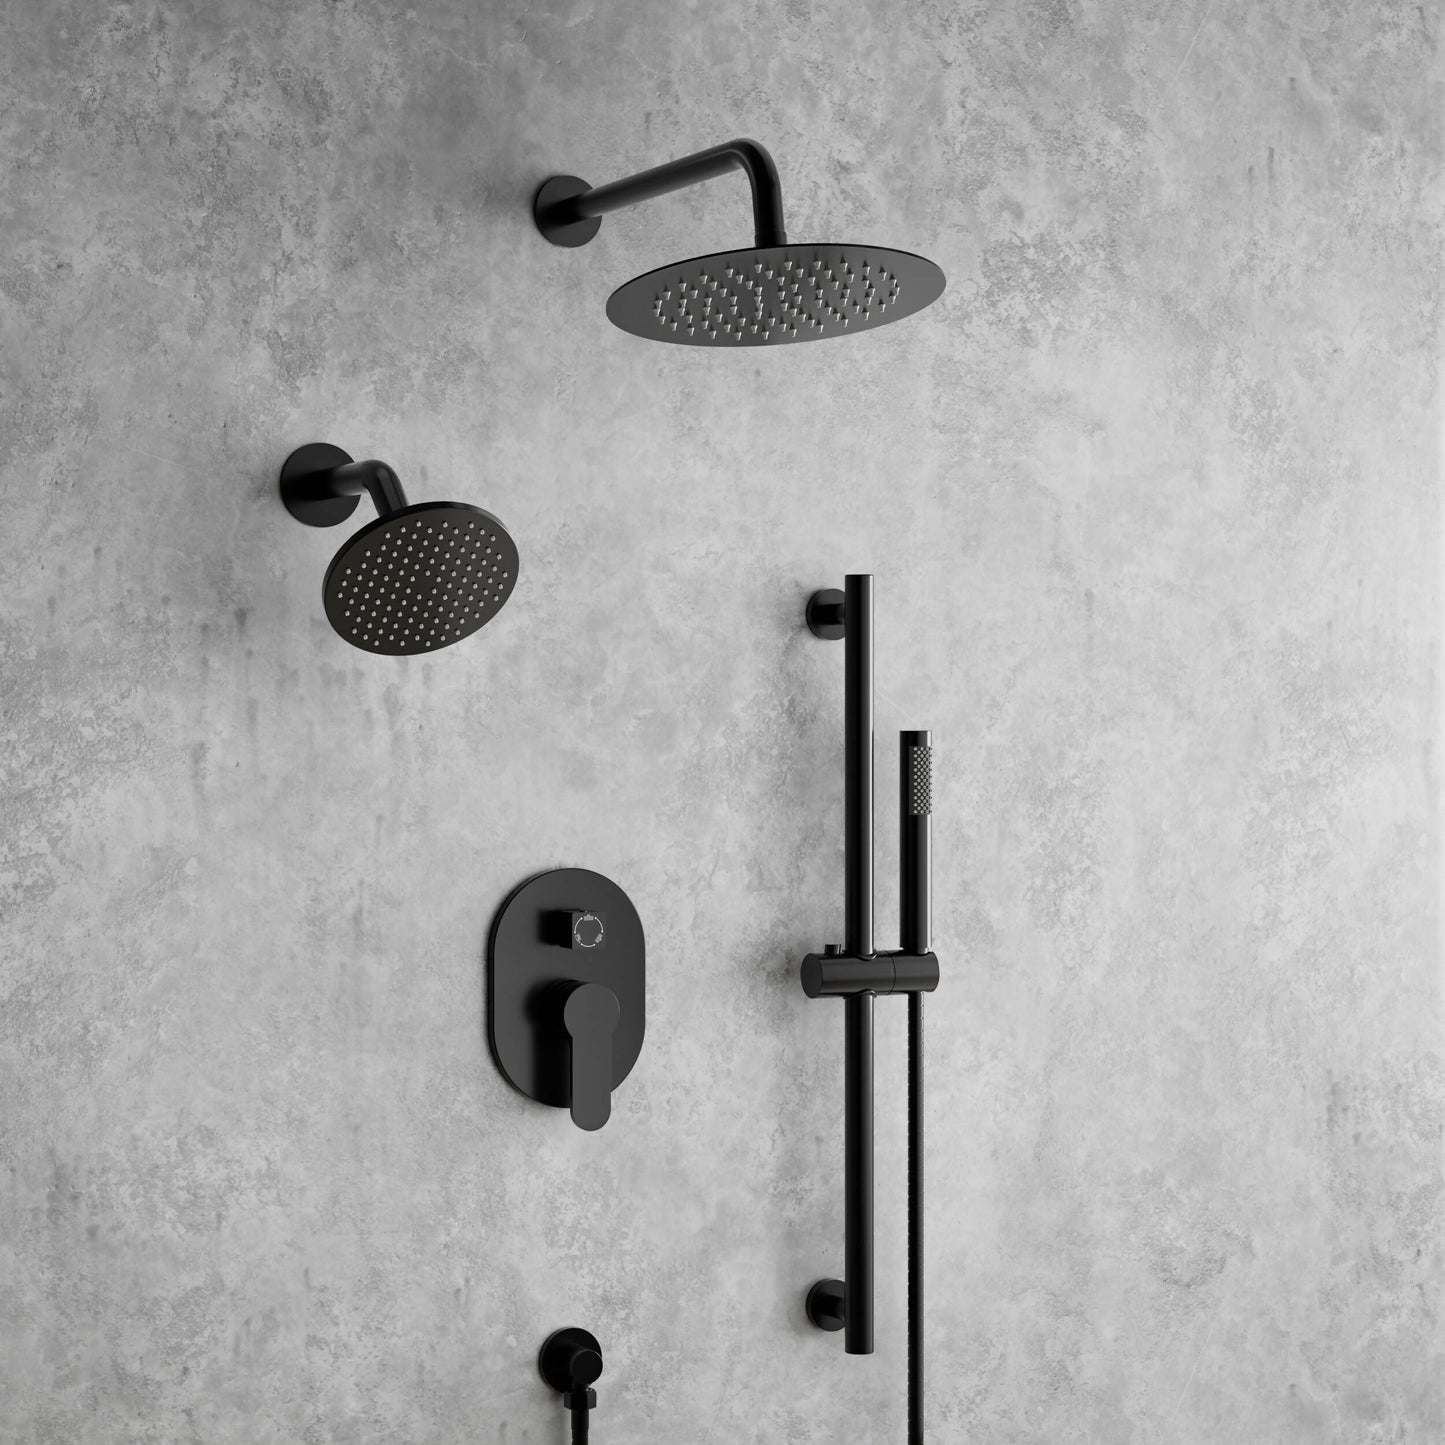 DualJetSpa 10" High-Pressure Rainfall Shower Faucet with Handheld Spray, Wall Mount, Rough in-Valve